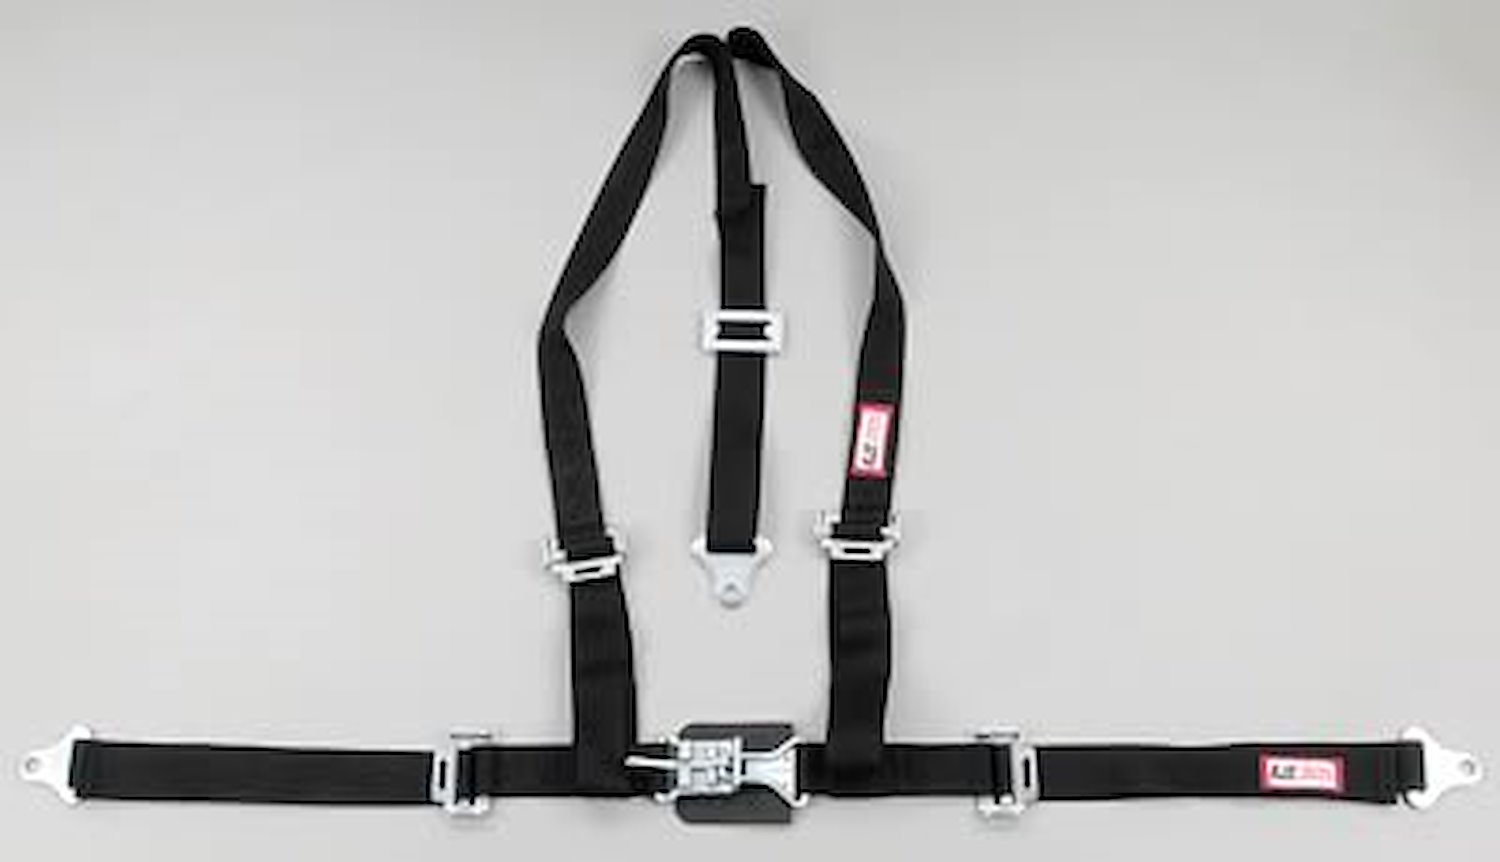 NON-SFI L&L HARNESS 2 PULL DOWN Lap Belt w/Adjuster 2 S.H. Y FLOOR MOUNT w/STERNUM STRAP ALL WRAP ENDS GRAY